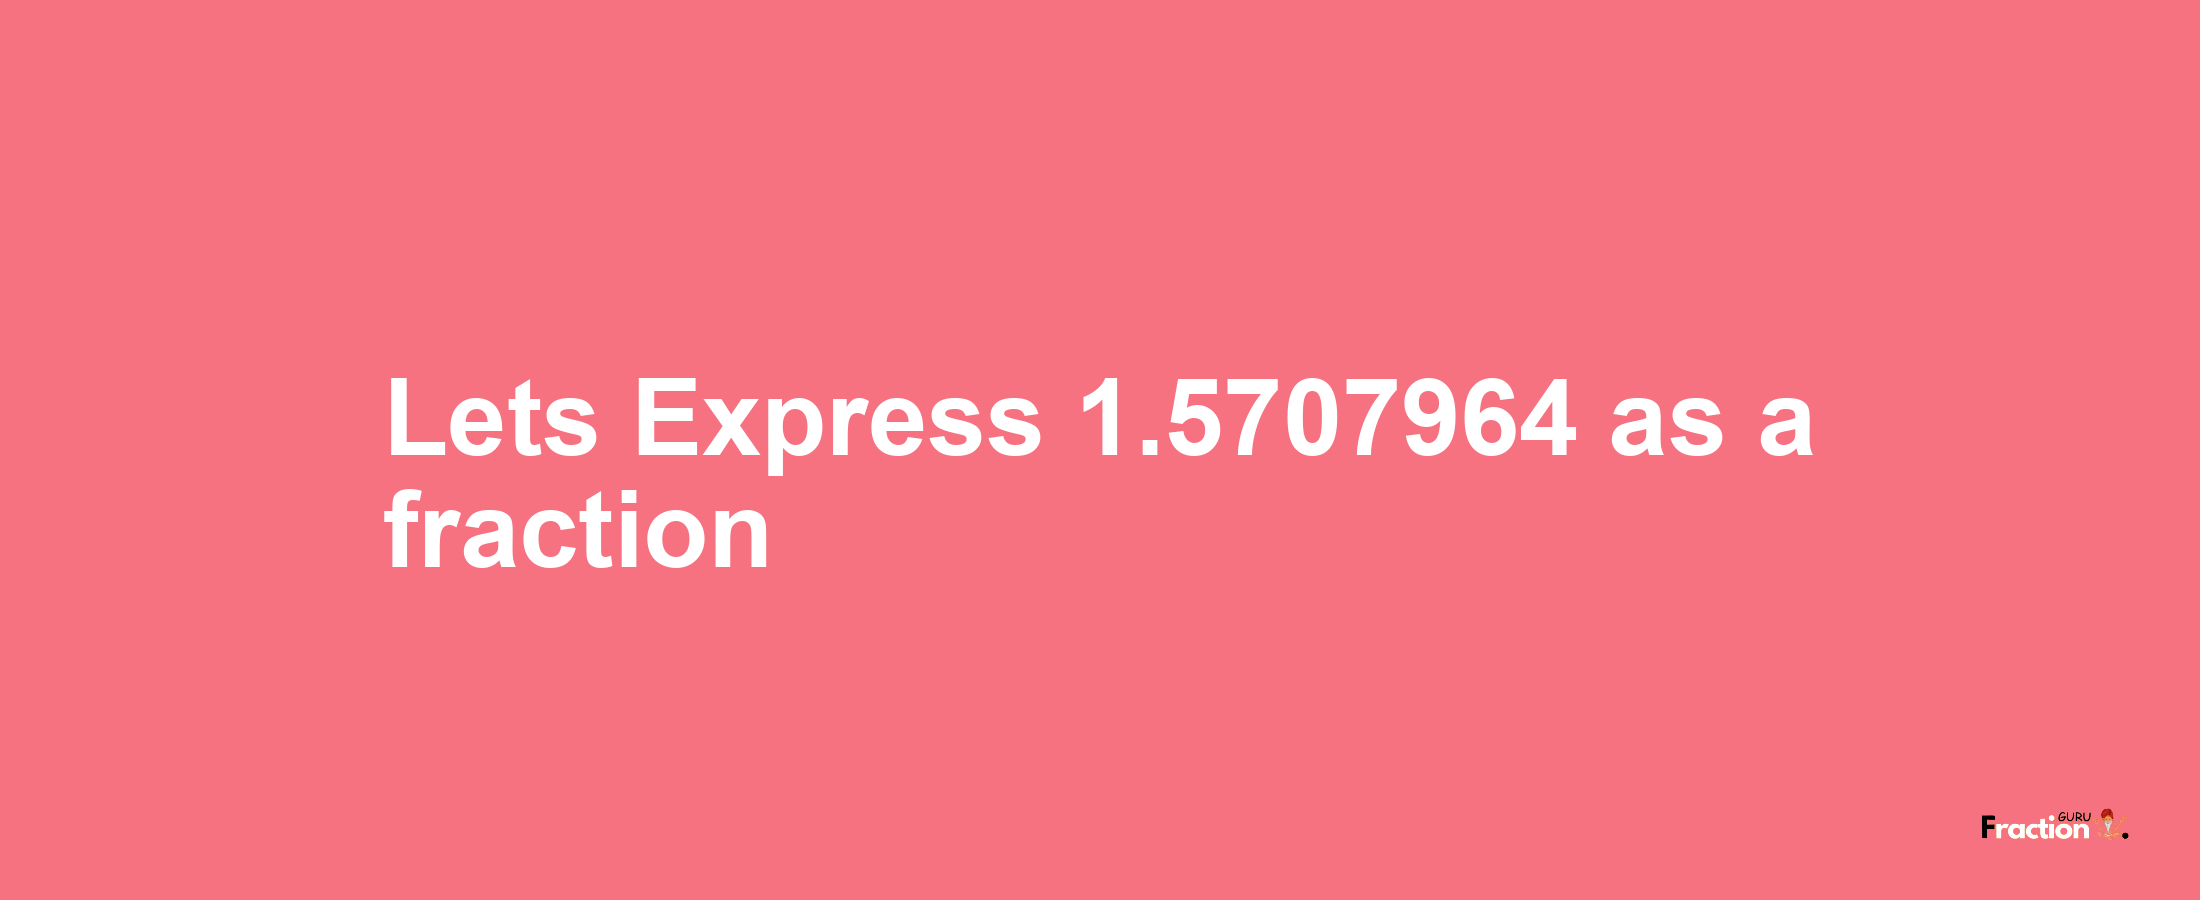 Lets Express 1.5707964 as afraction